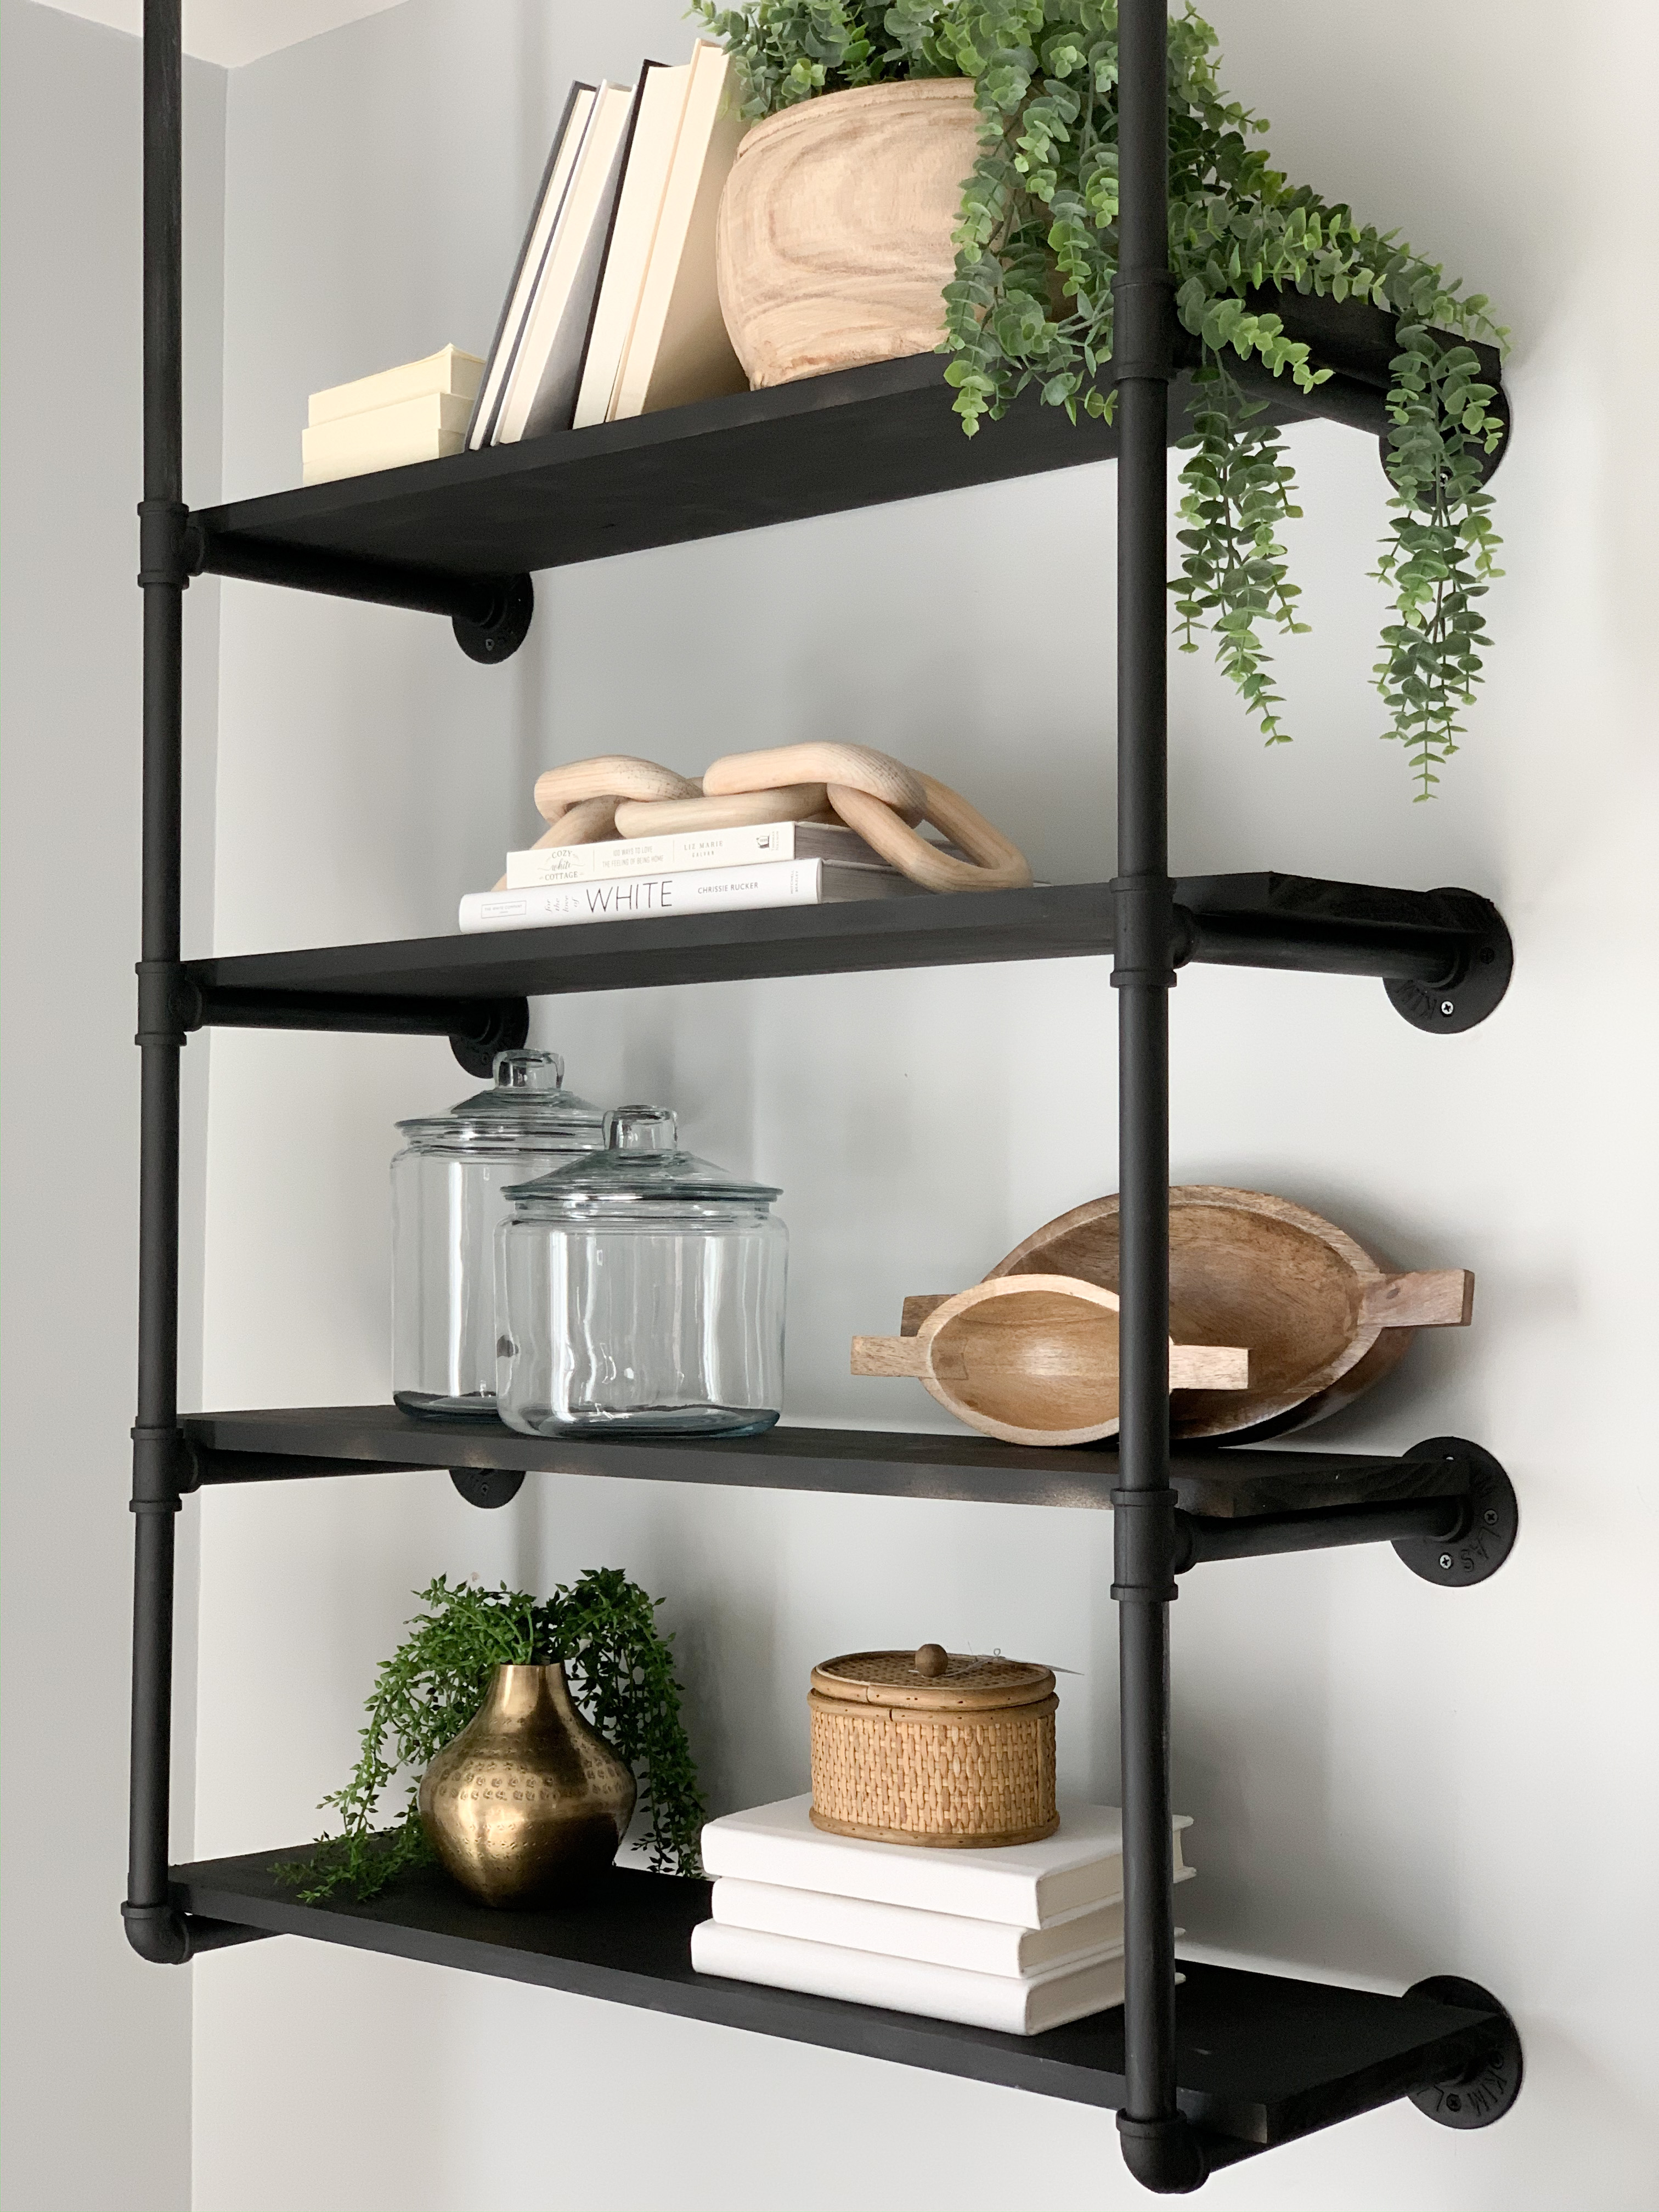 5 Elements for Modern Shelves - Champagne Chaos